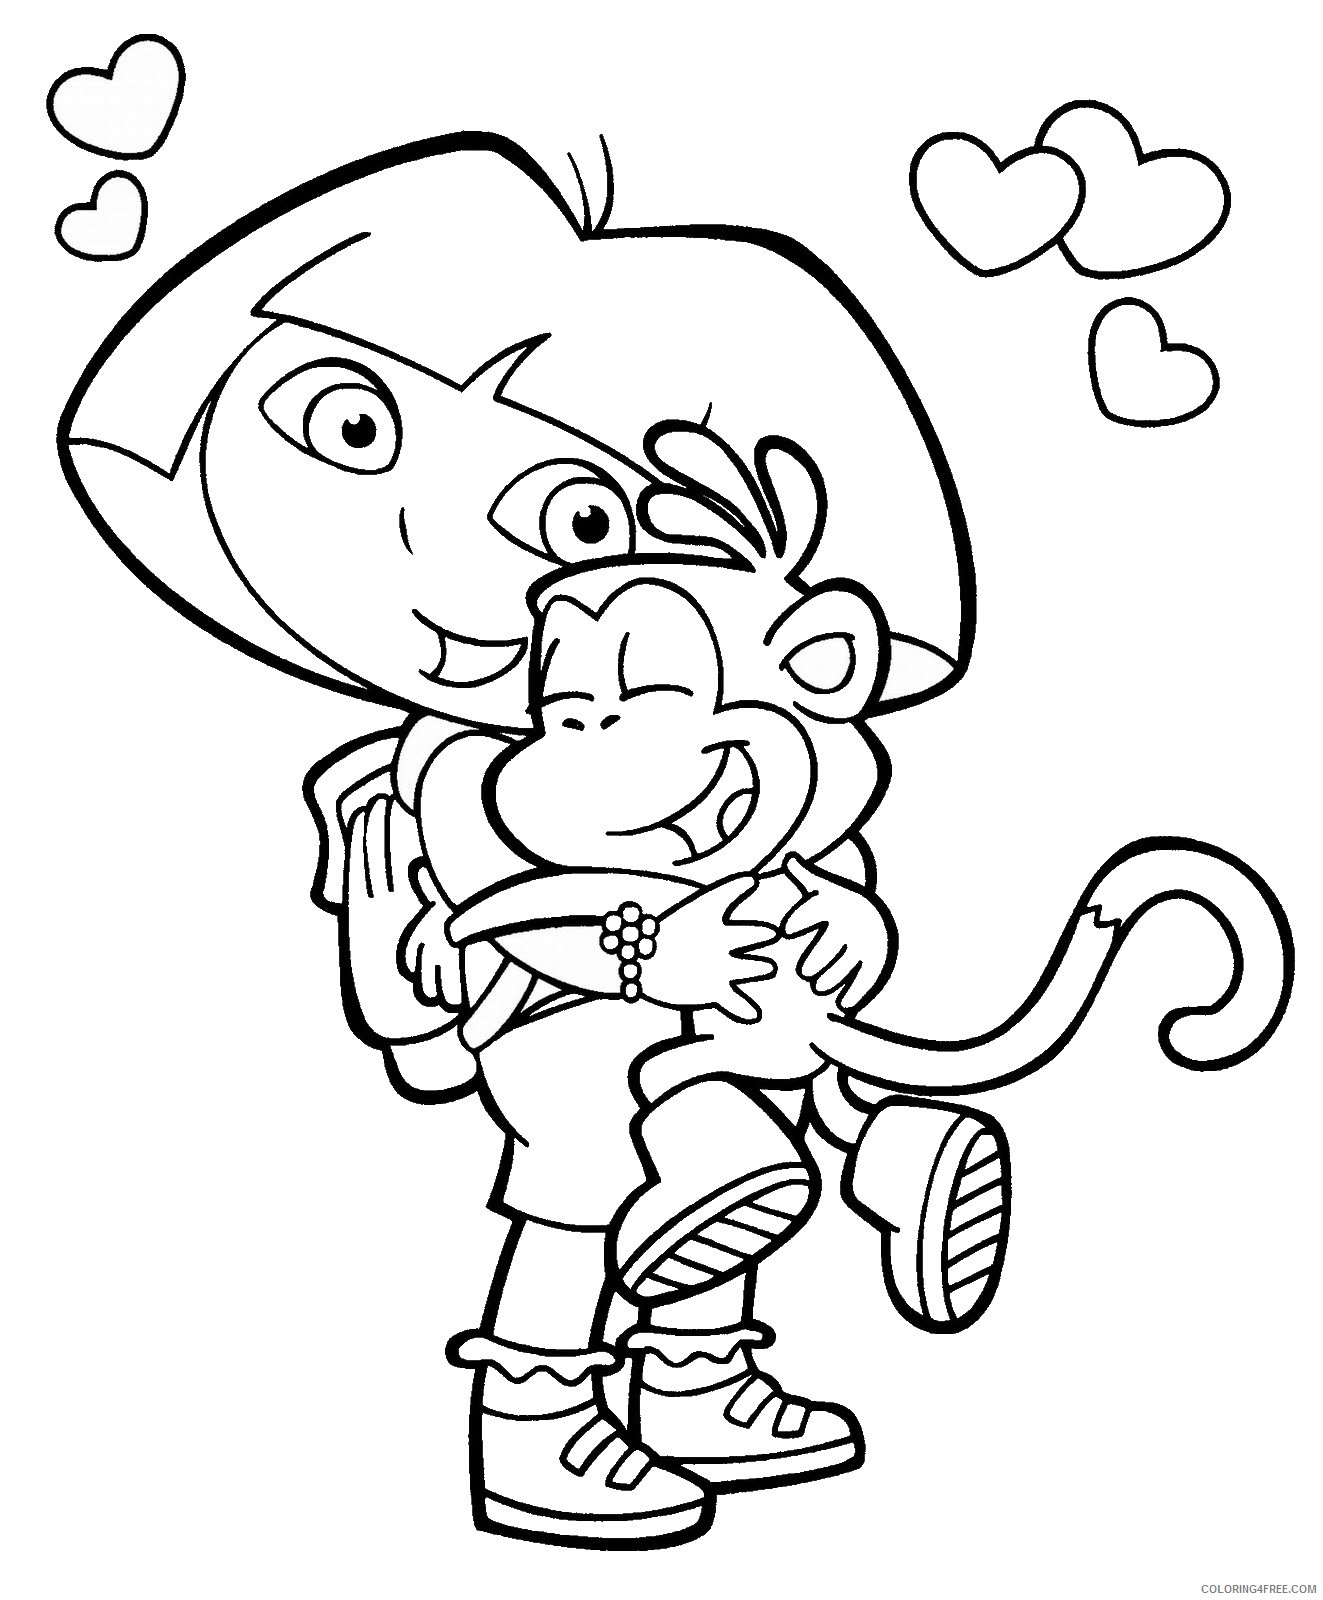 Dora the Explorer Coloring Pages Cartoons cl_dora_63 Printable 2020 2624 Coloring4free